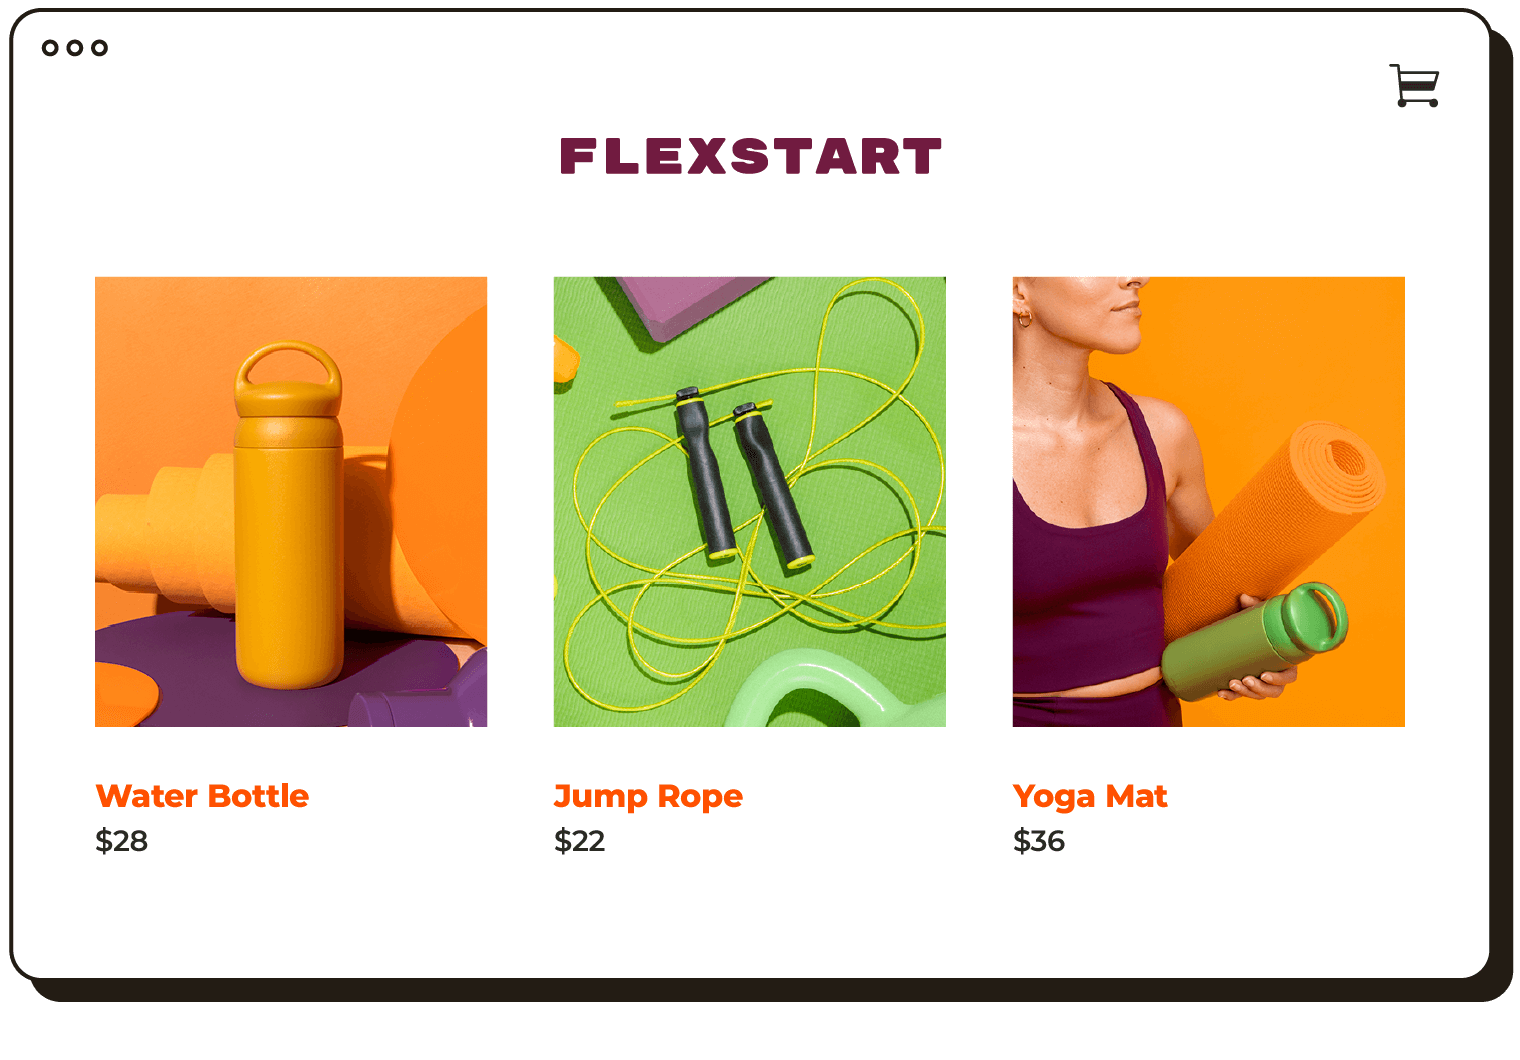 Abstract UI of an online store called Flexstart selling a water bottle for $28, a jump rope for $22, and a yoga mat for $36